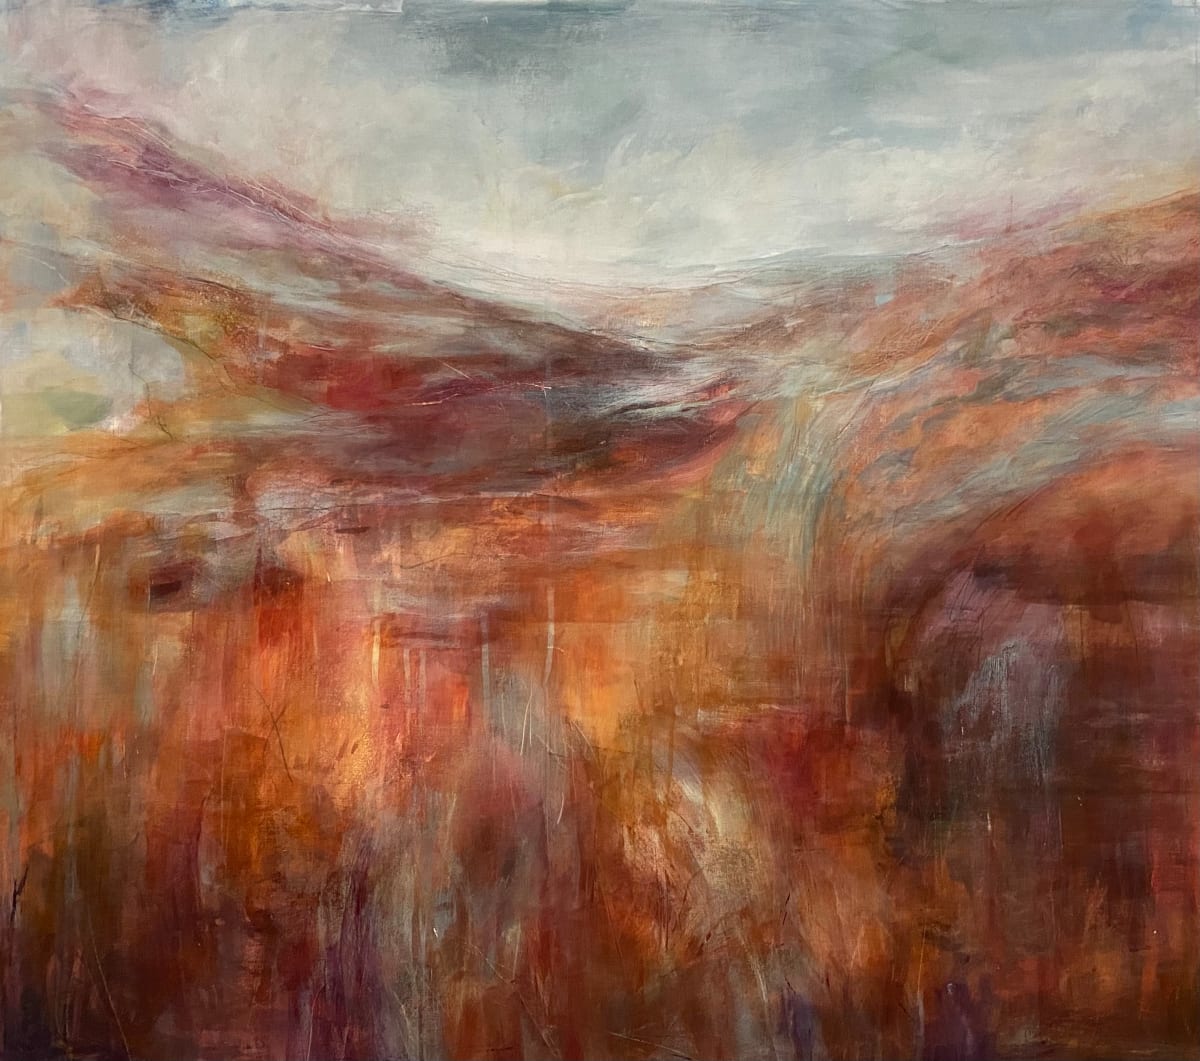 Autumn Flow by Jo York  Image: Autumn Flow-about walking a local moorland at the height of Autumn, bathed in colour and light and with patches of water on the recently wet land.
Painted in many layers of opaque and translucent acrylics.